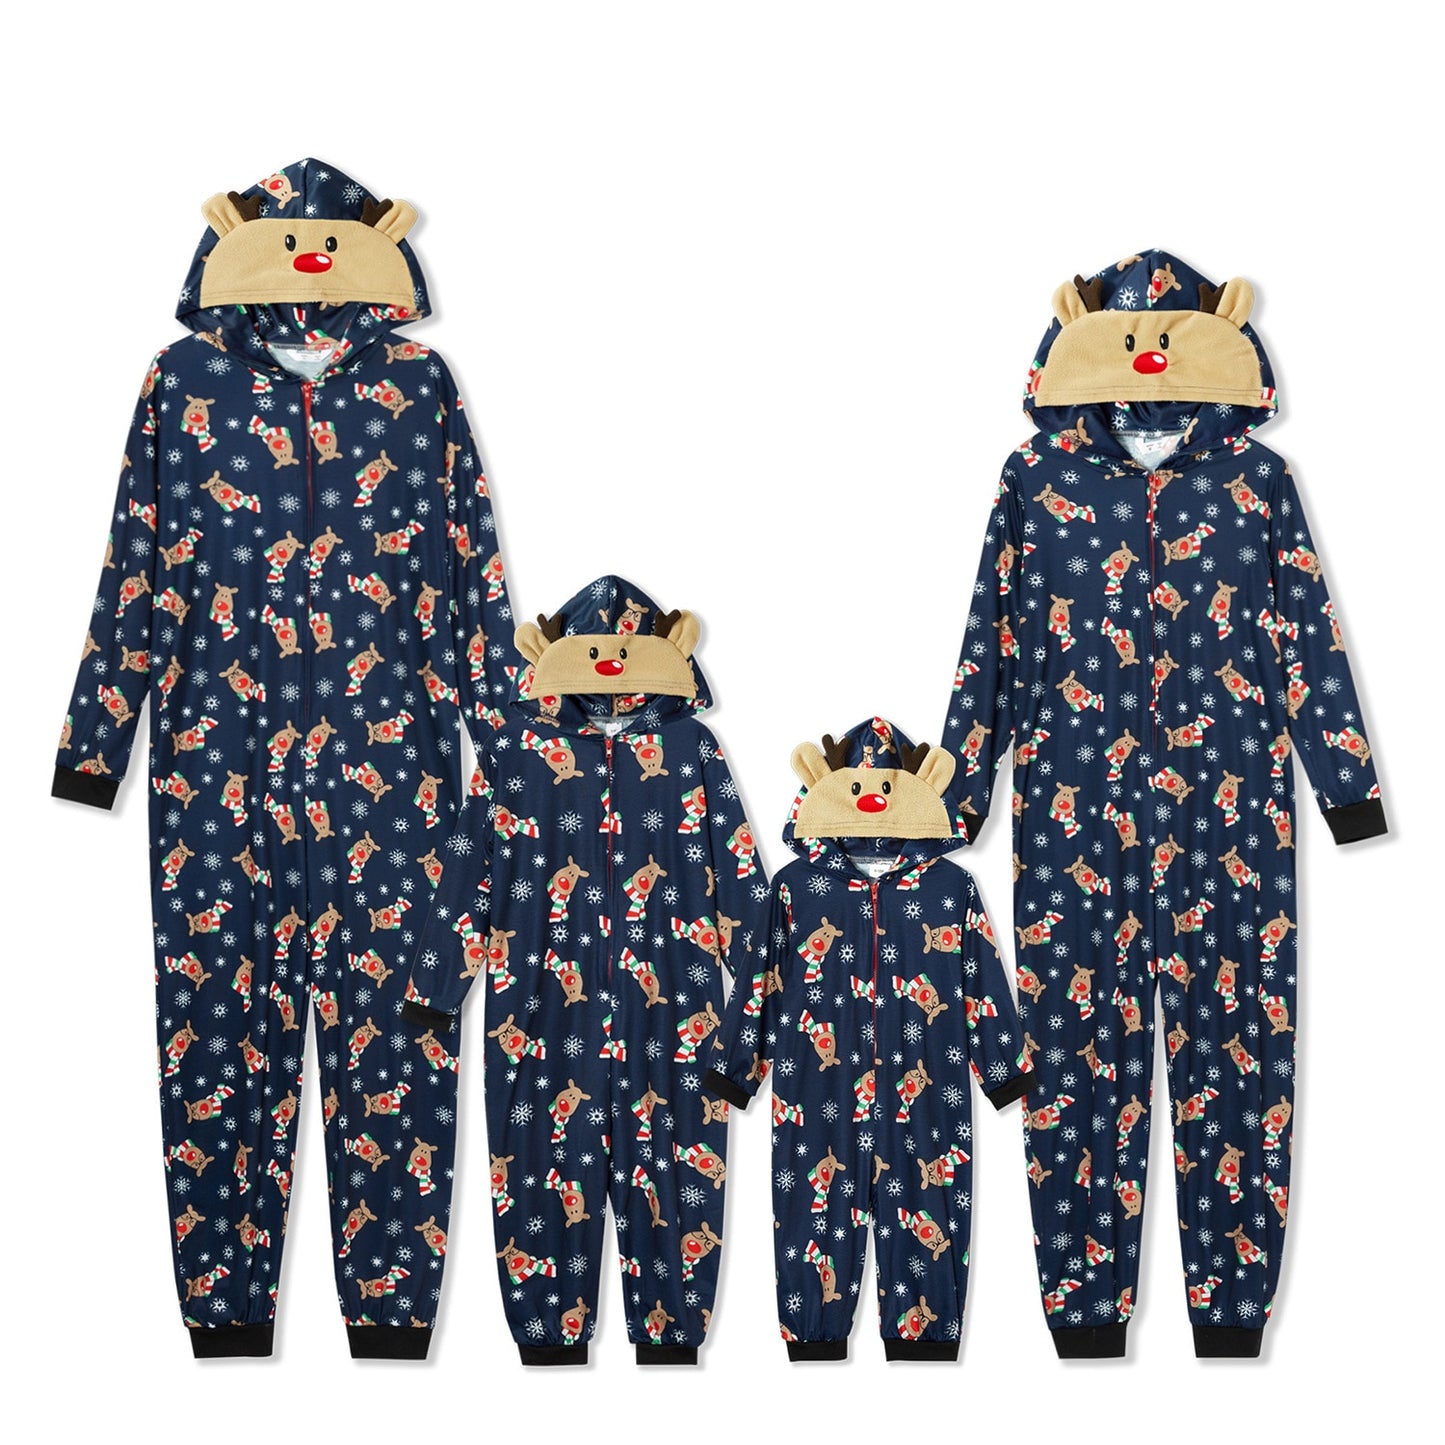 Matching Reindeer Onesies For Family